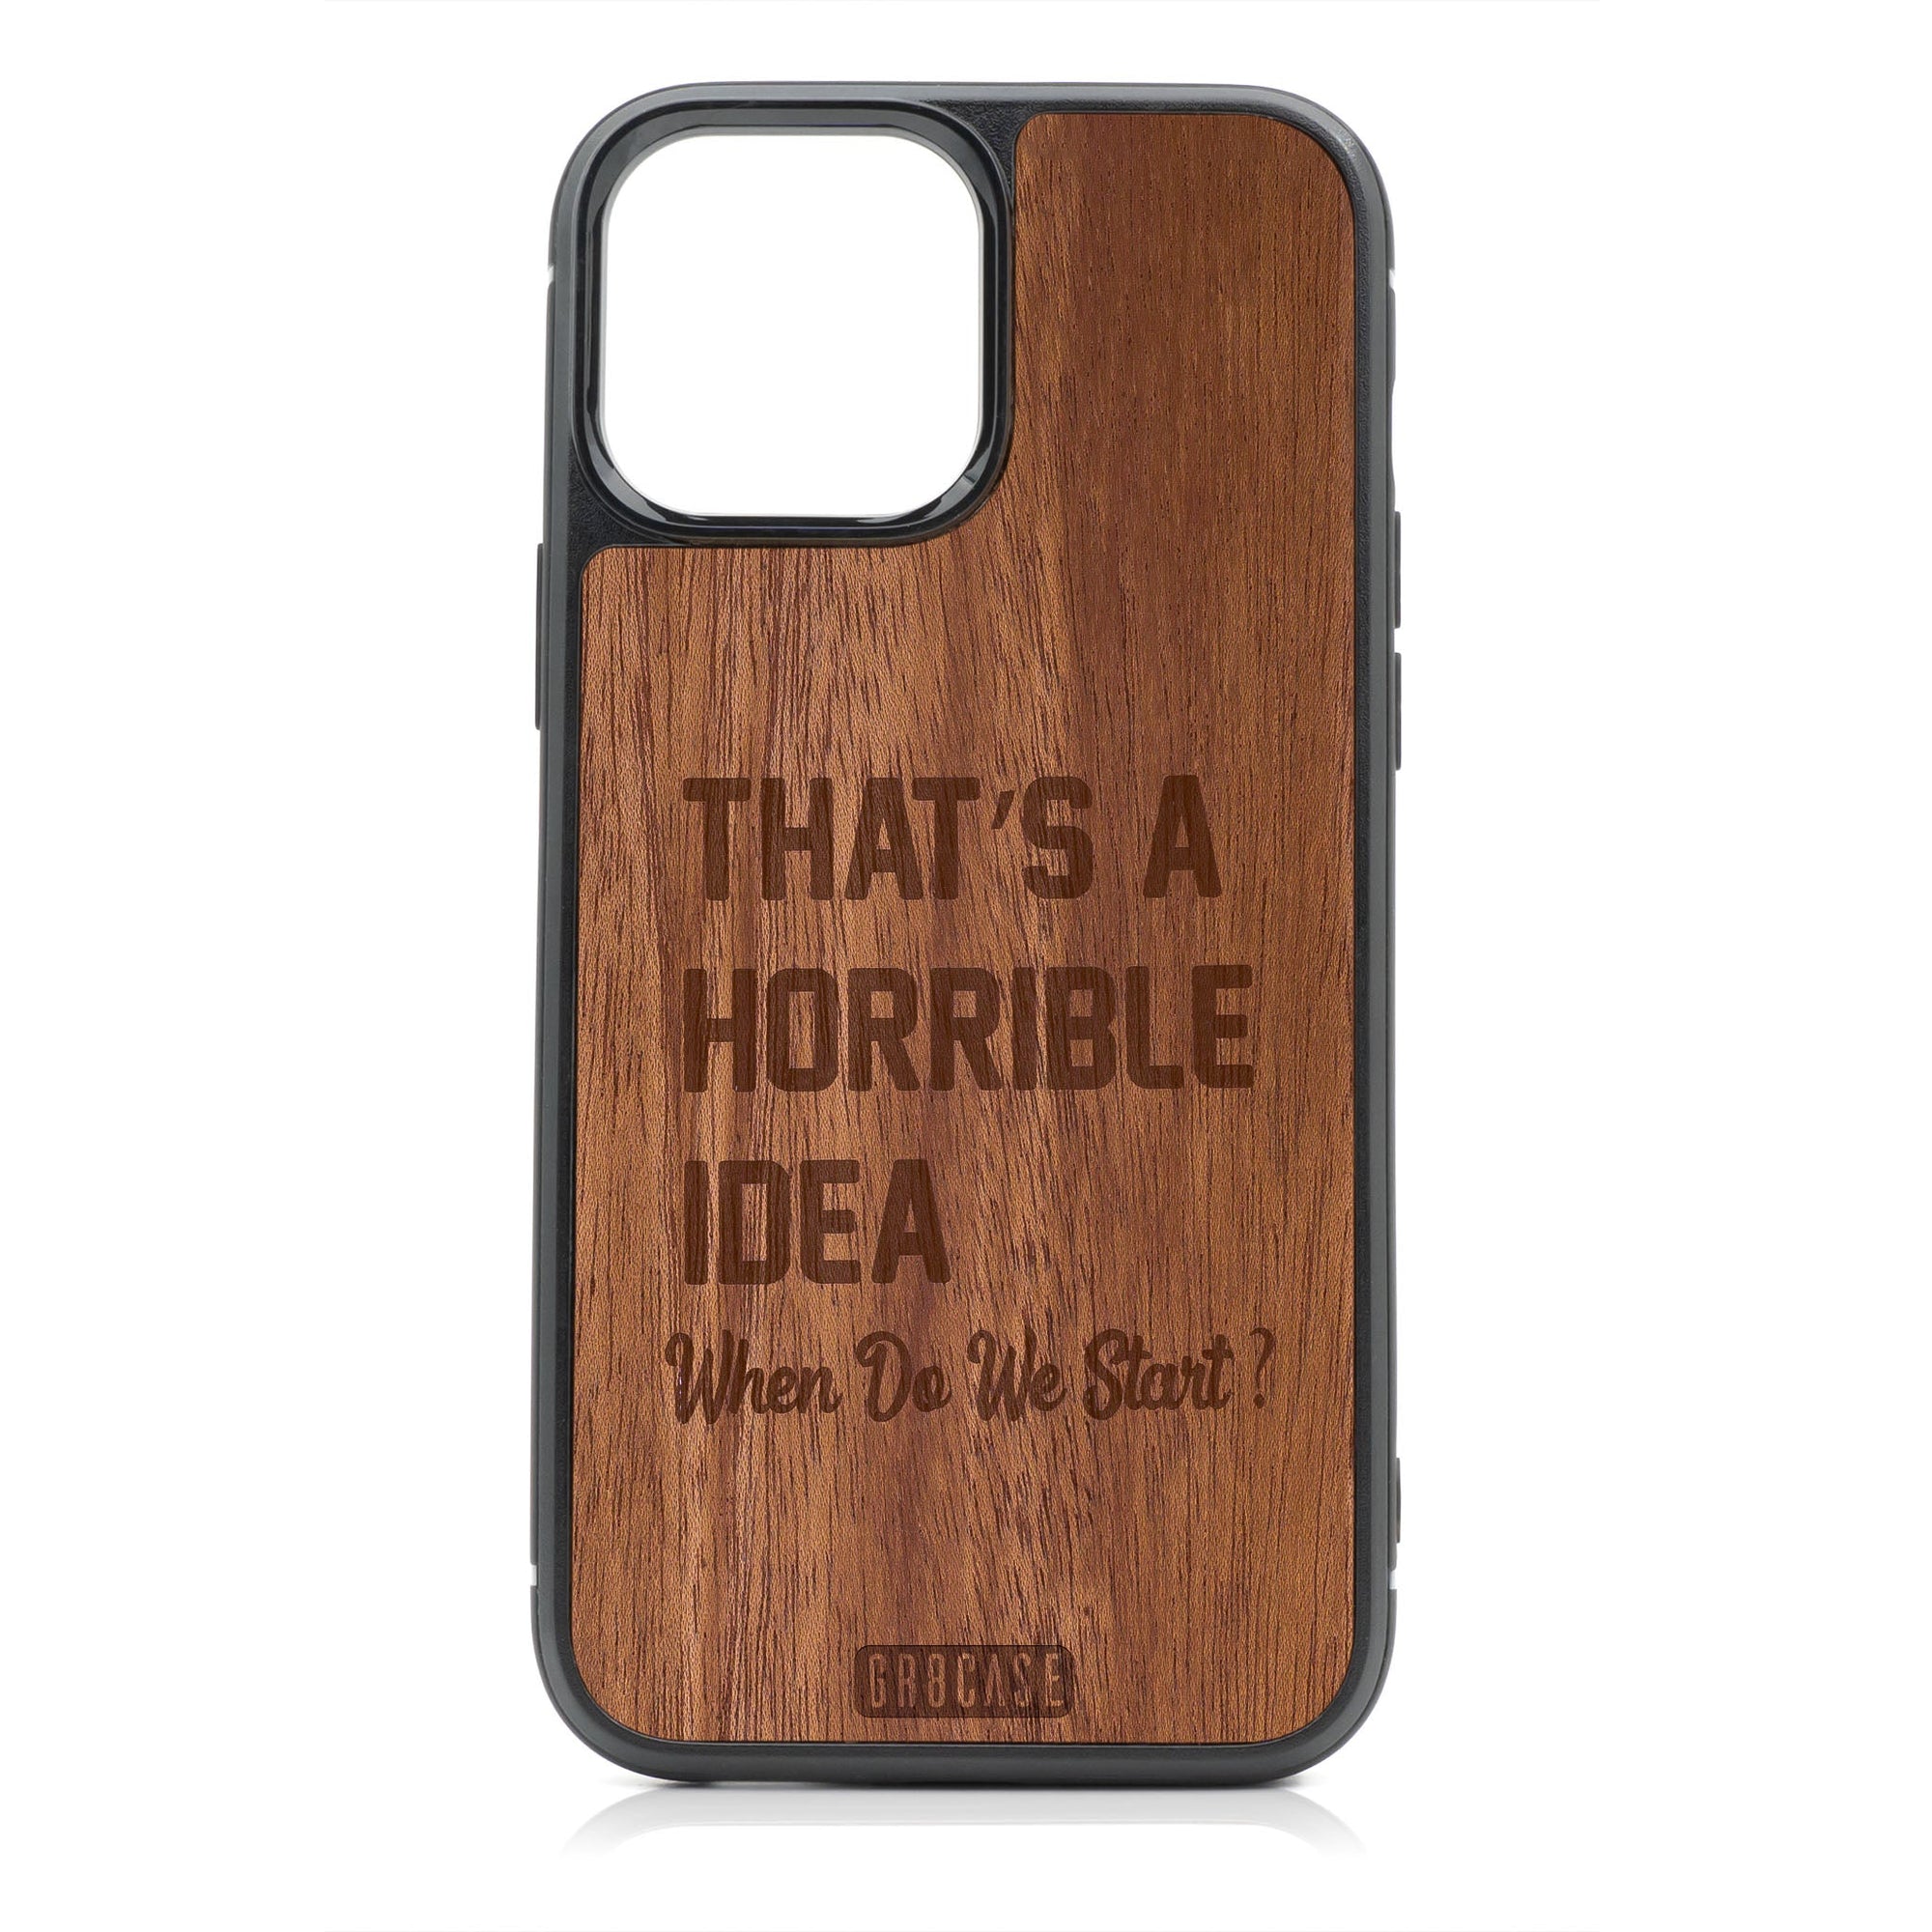 That's A Horrible Idea When Do We Start? Design Wood Case For iPhone 14 Pro Max